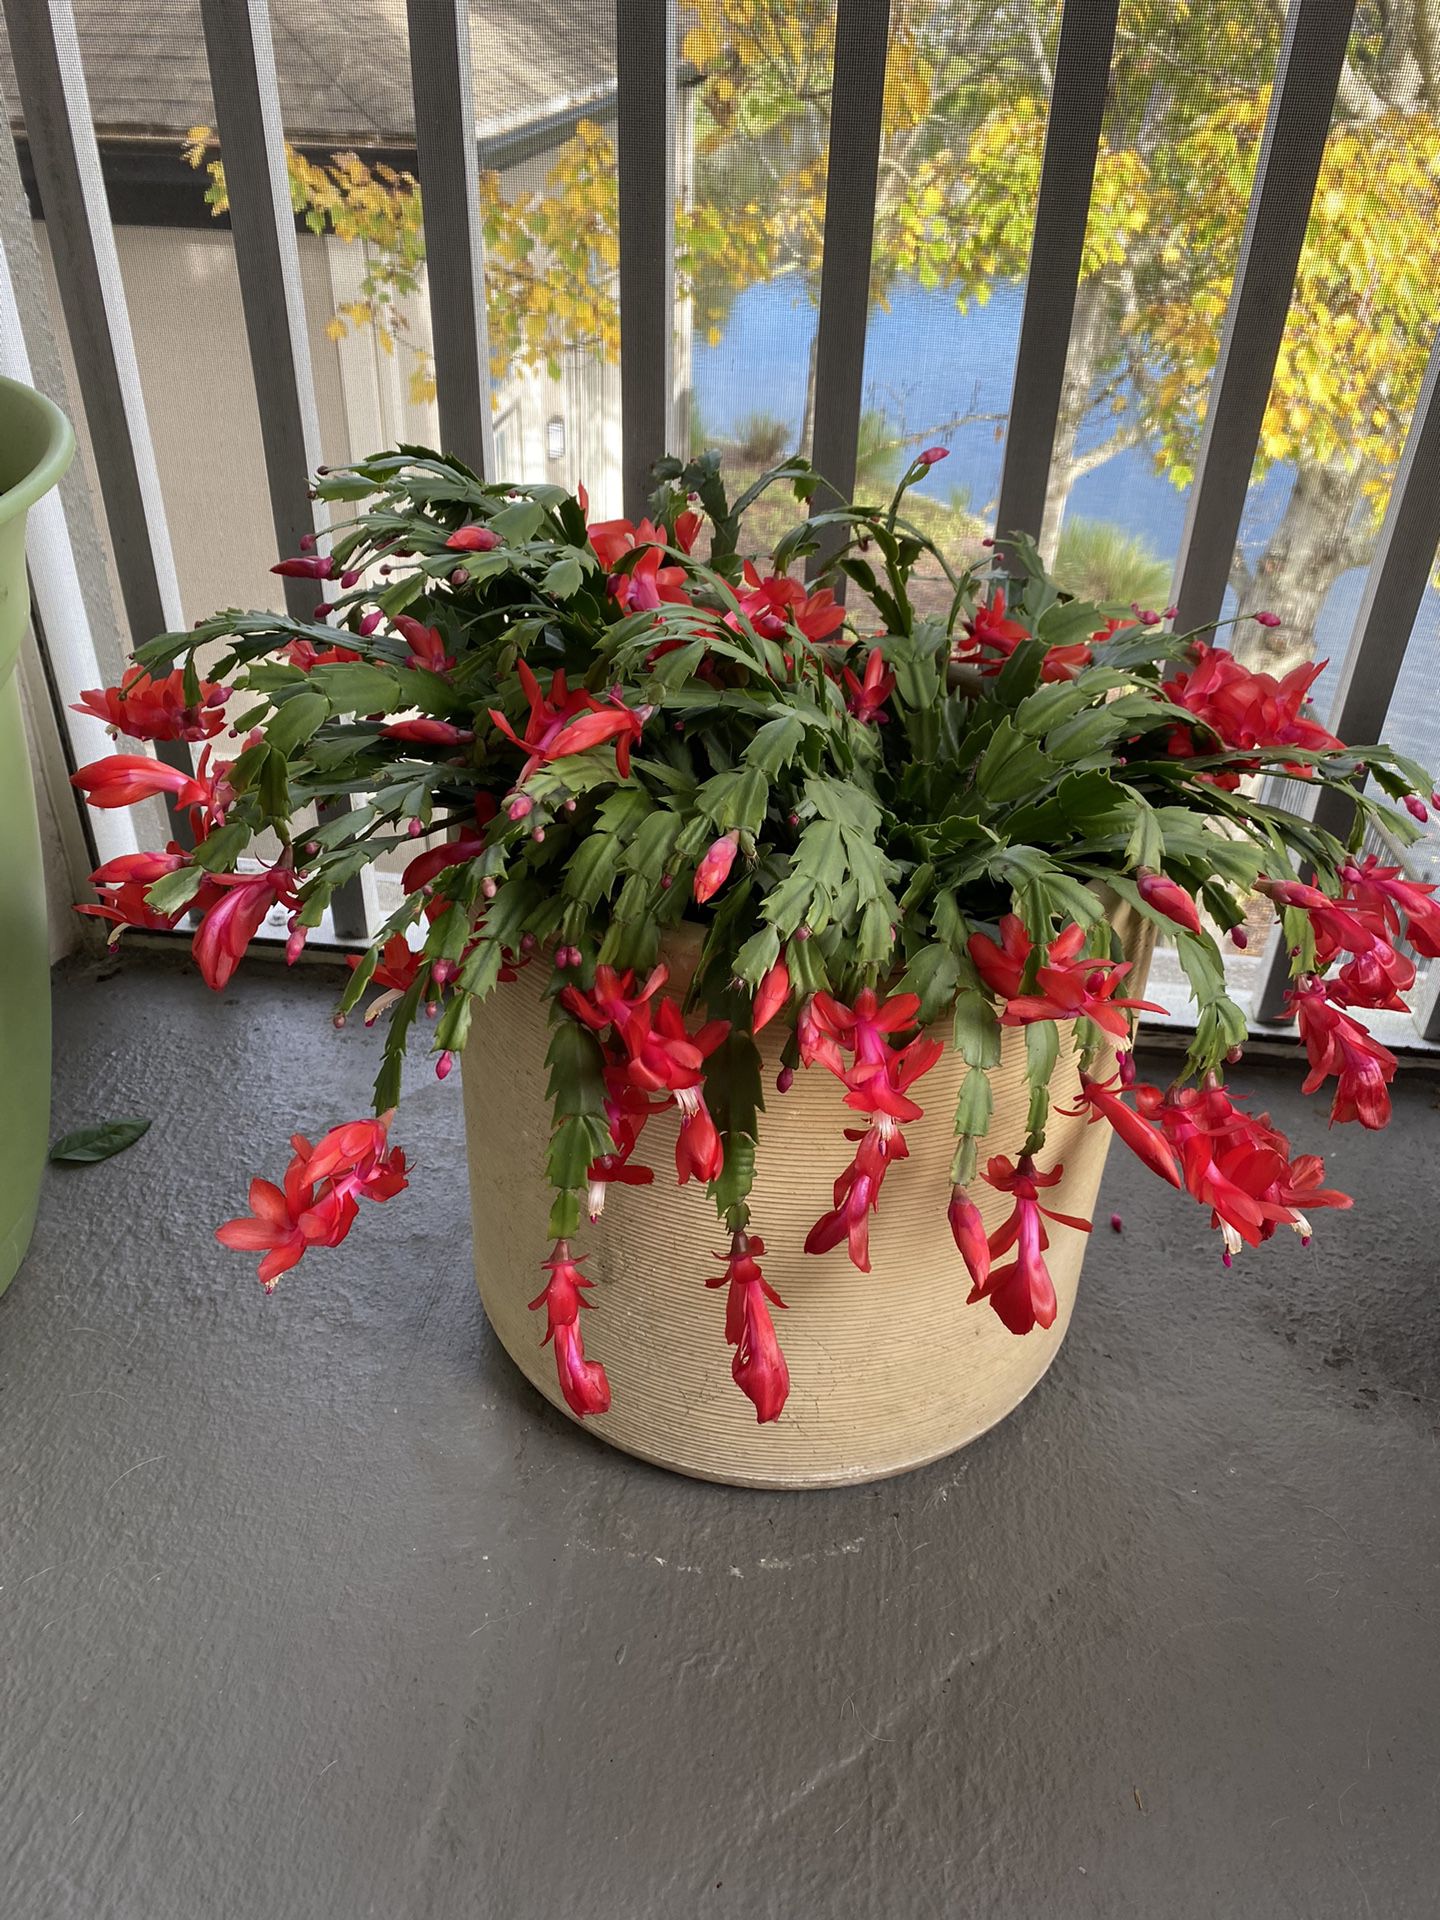 Potted Mature Christmas Cactus Plant